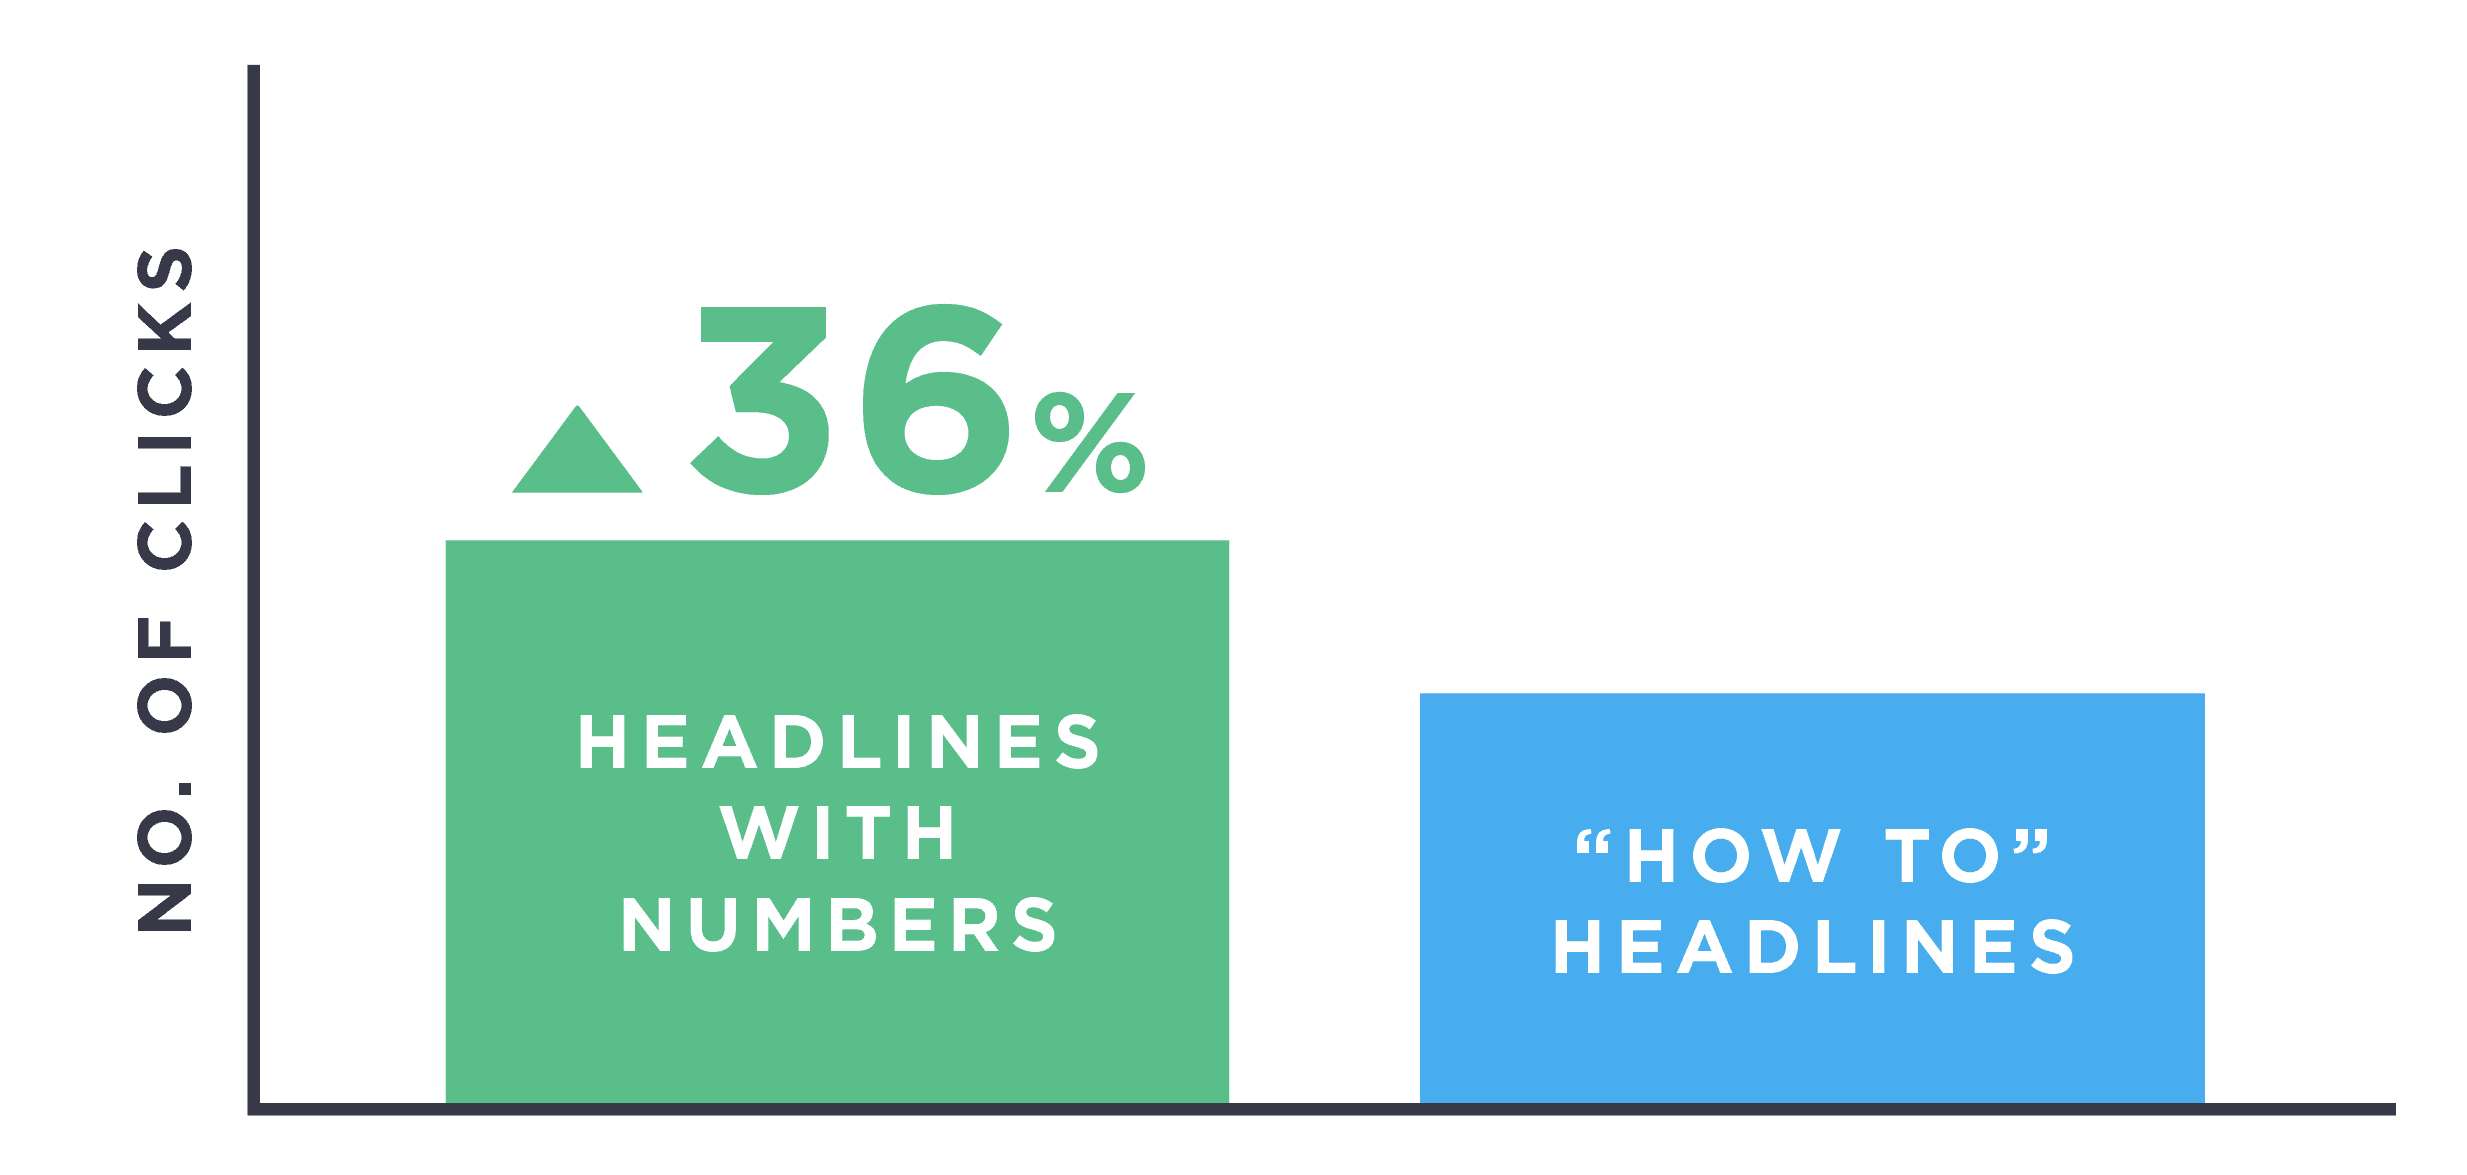 Headlines with numbers get more clicks